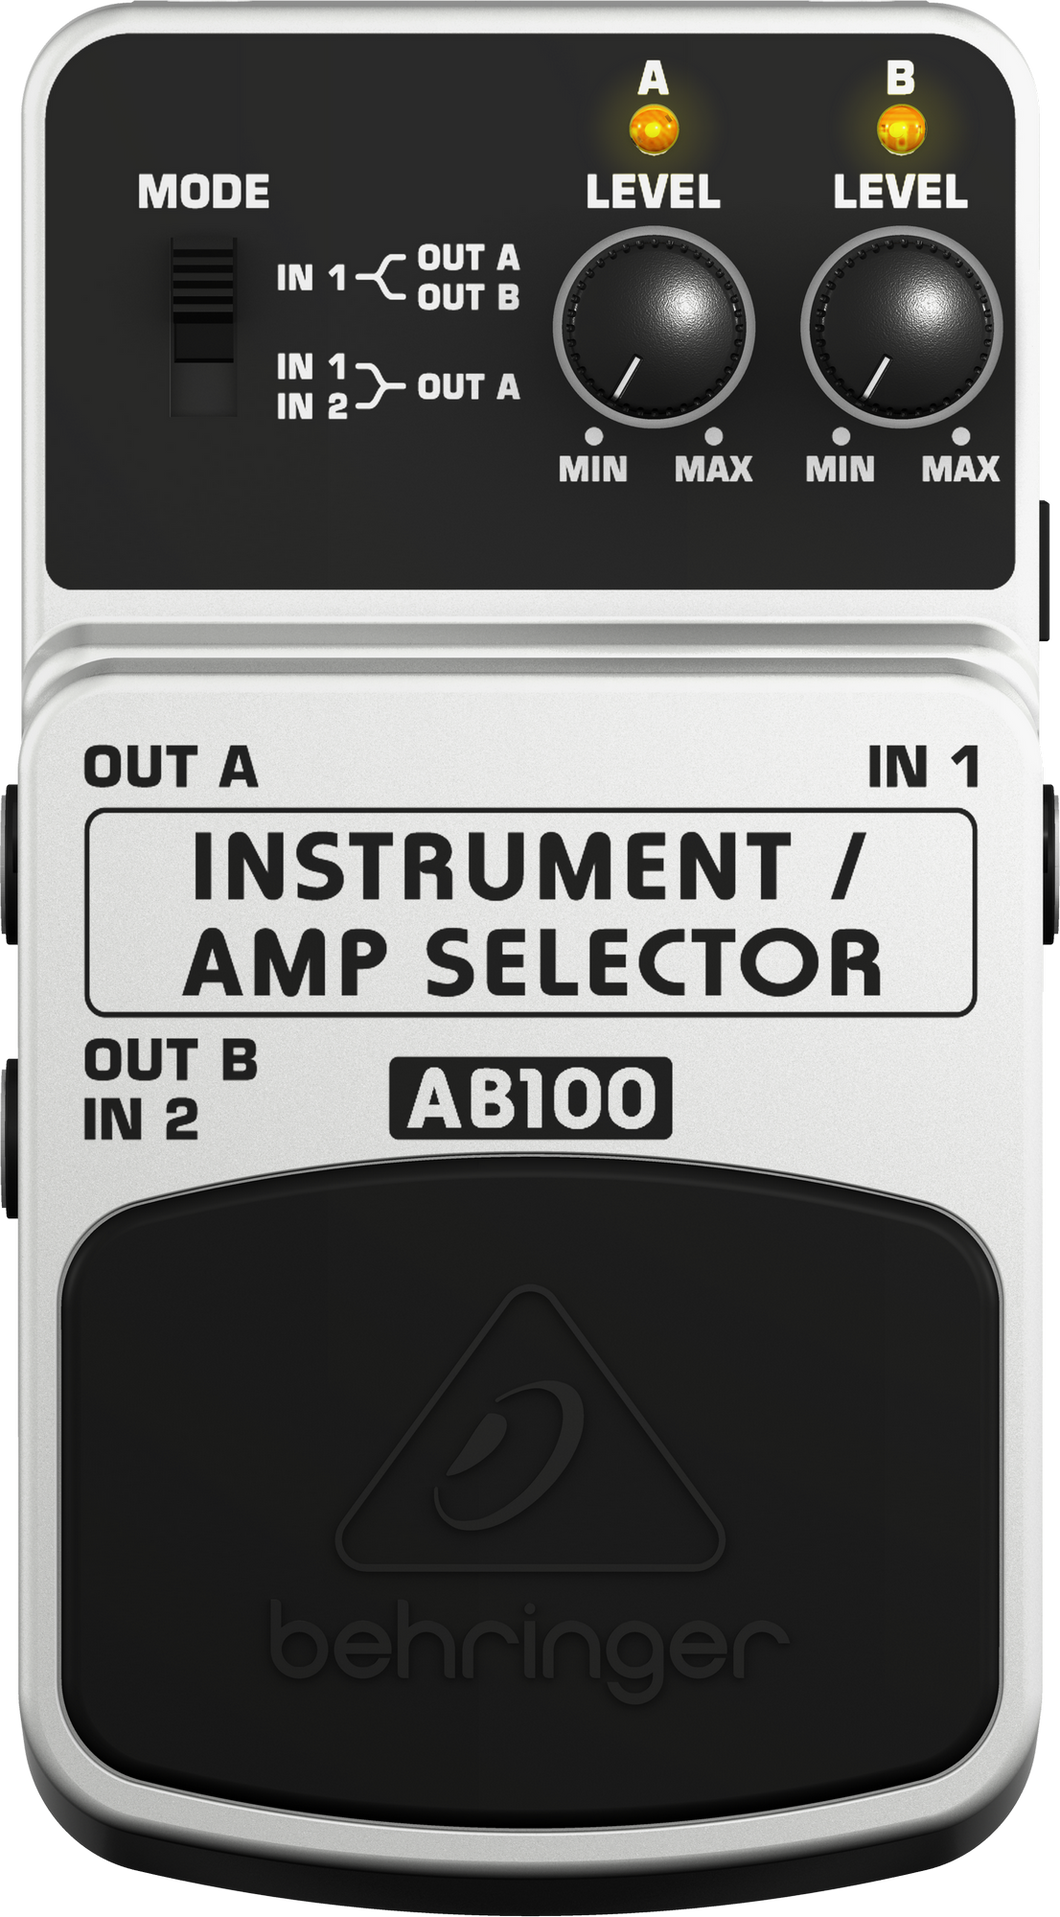 INSTRUMENT/AMP SELECTOR AB100